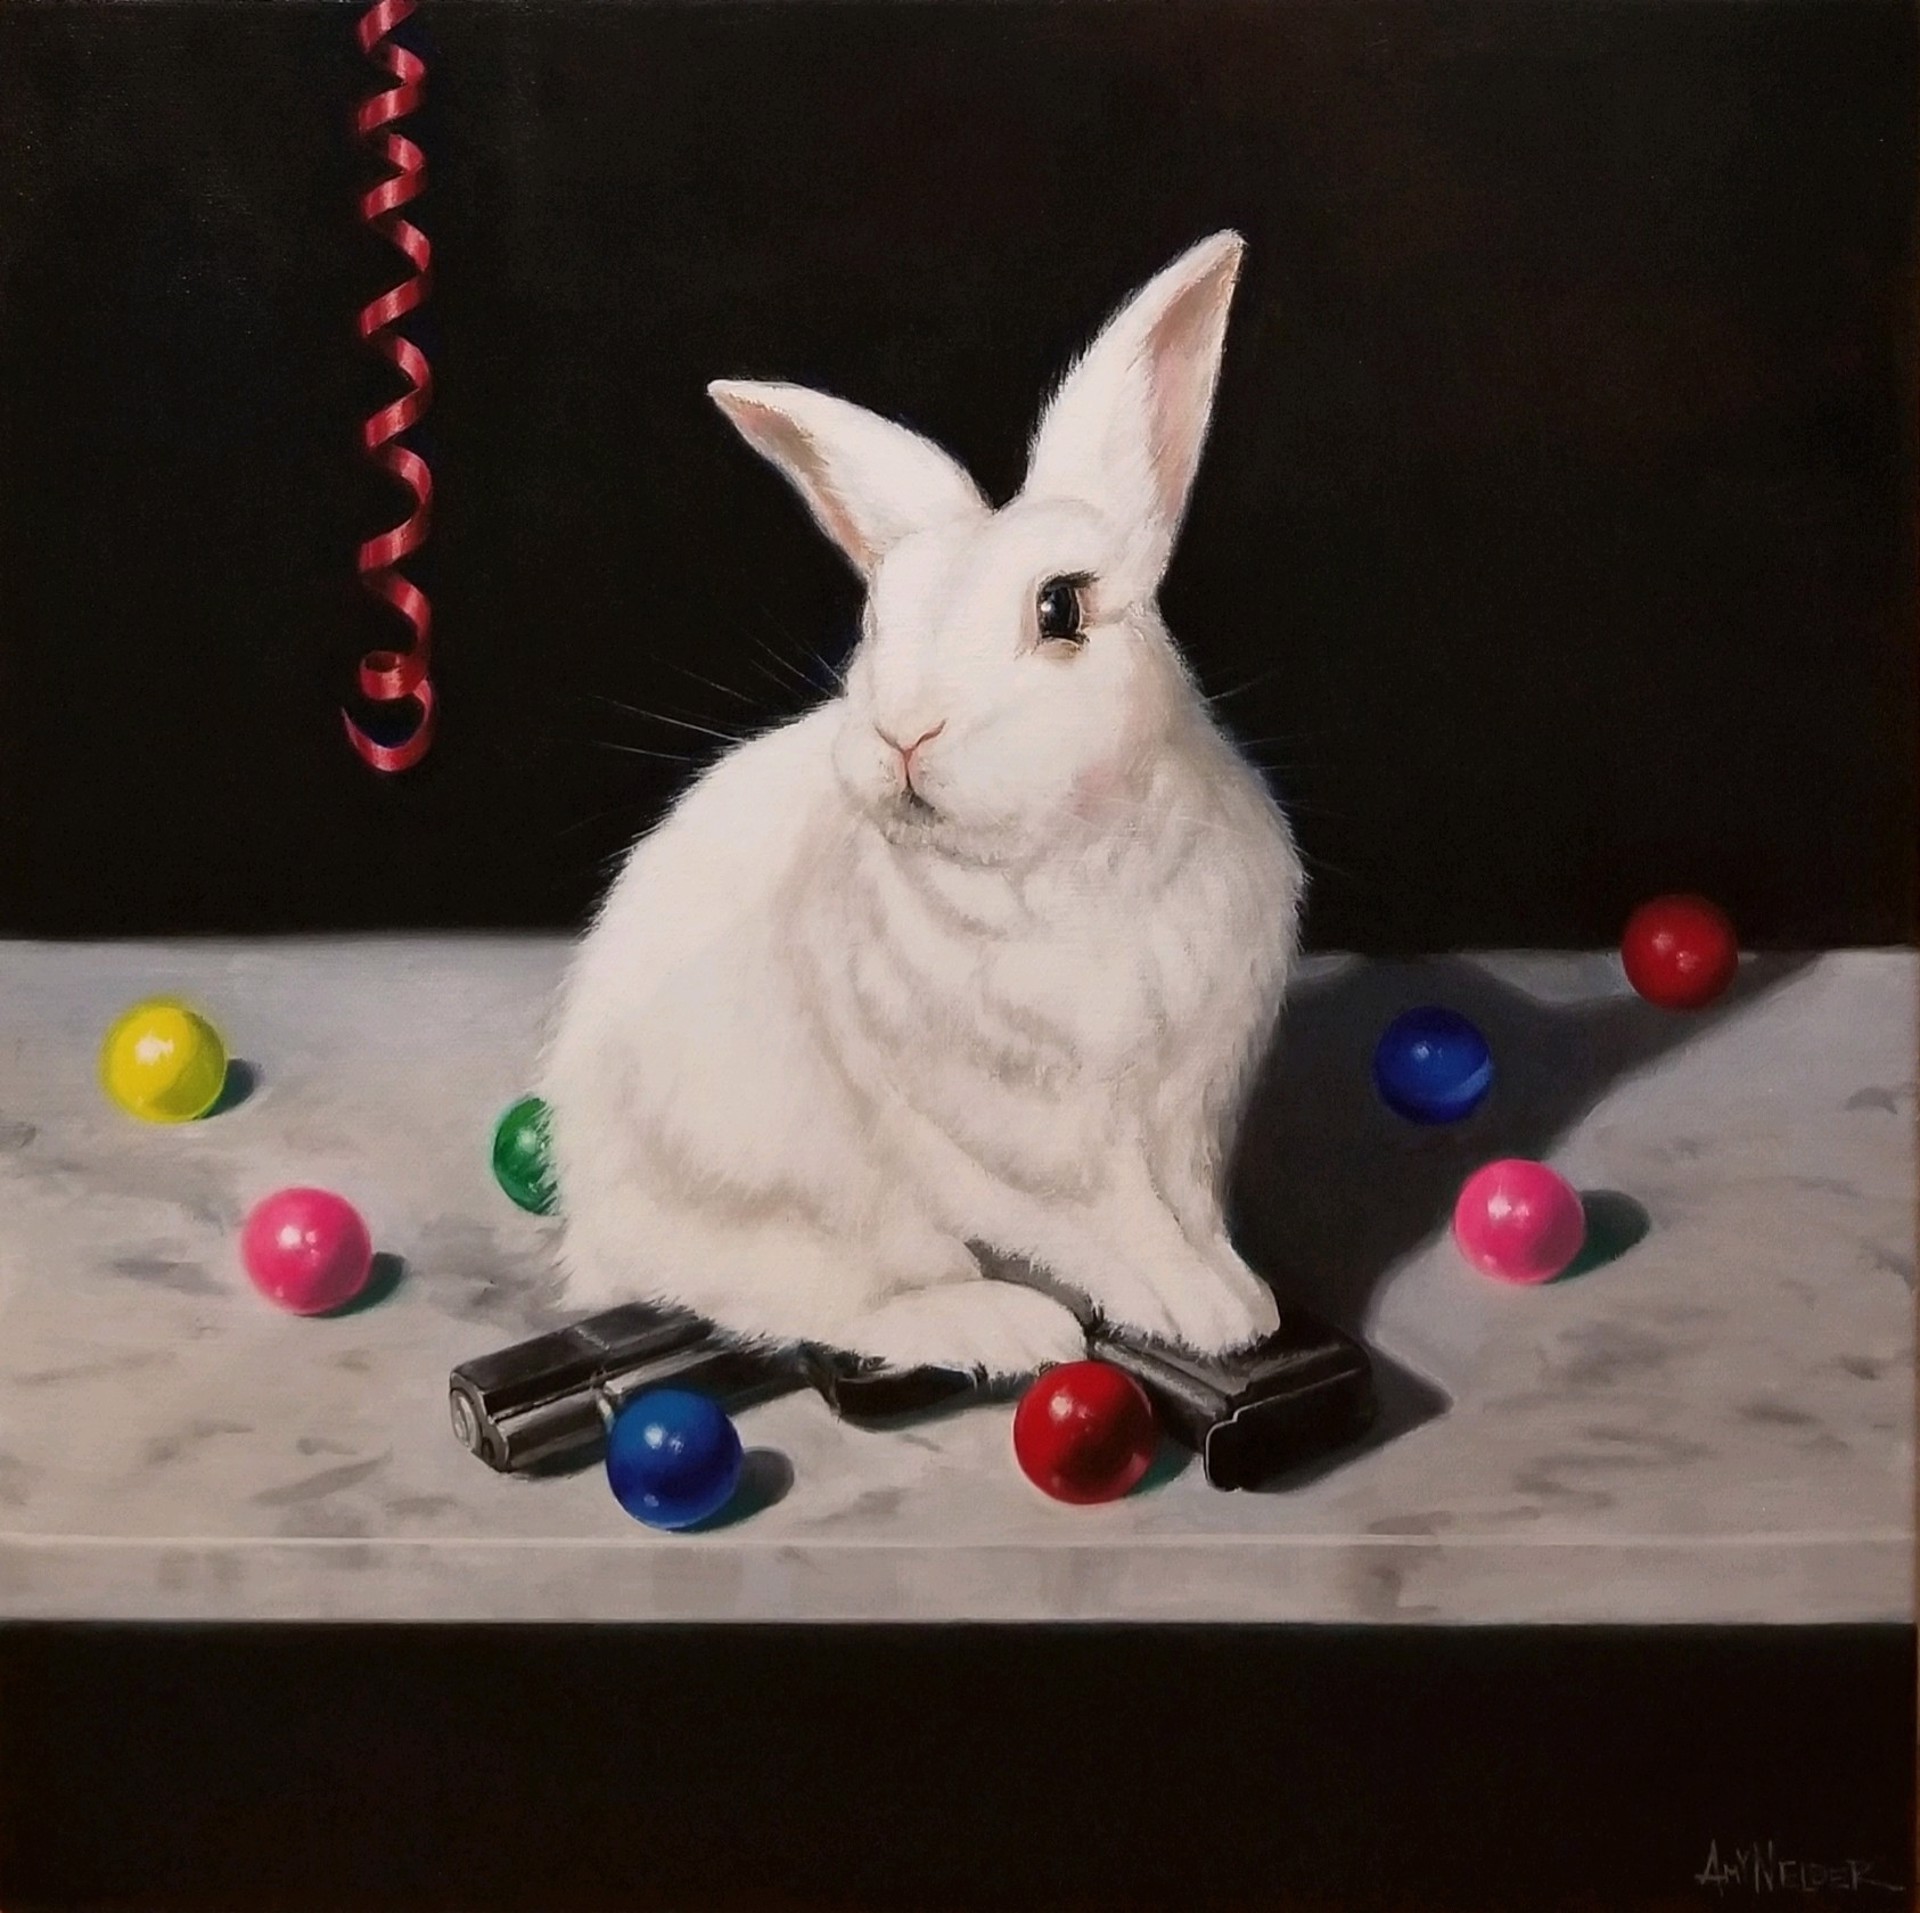 Bunnies and Guns #1 by Amy Nelder